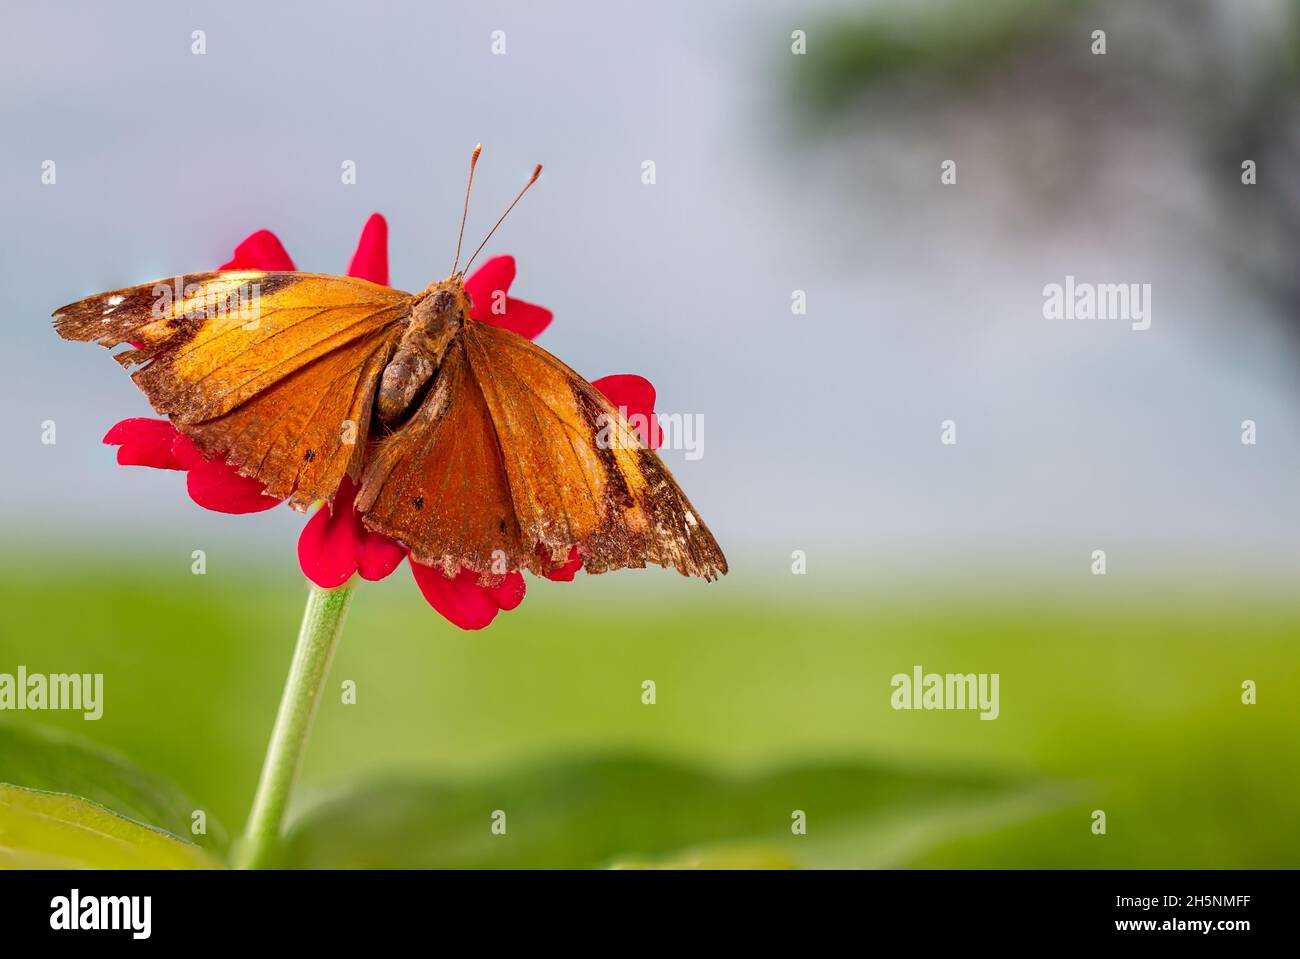 A brown butterfly perched on a red zinnia flower, has a soft green grass background and warm sunlight, copy space Stock Photo